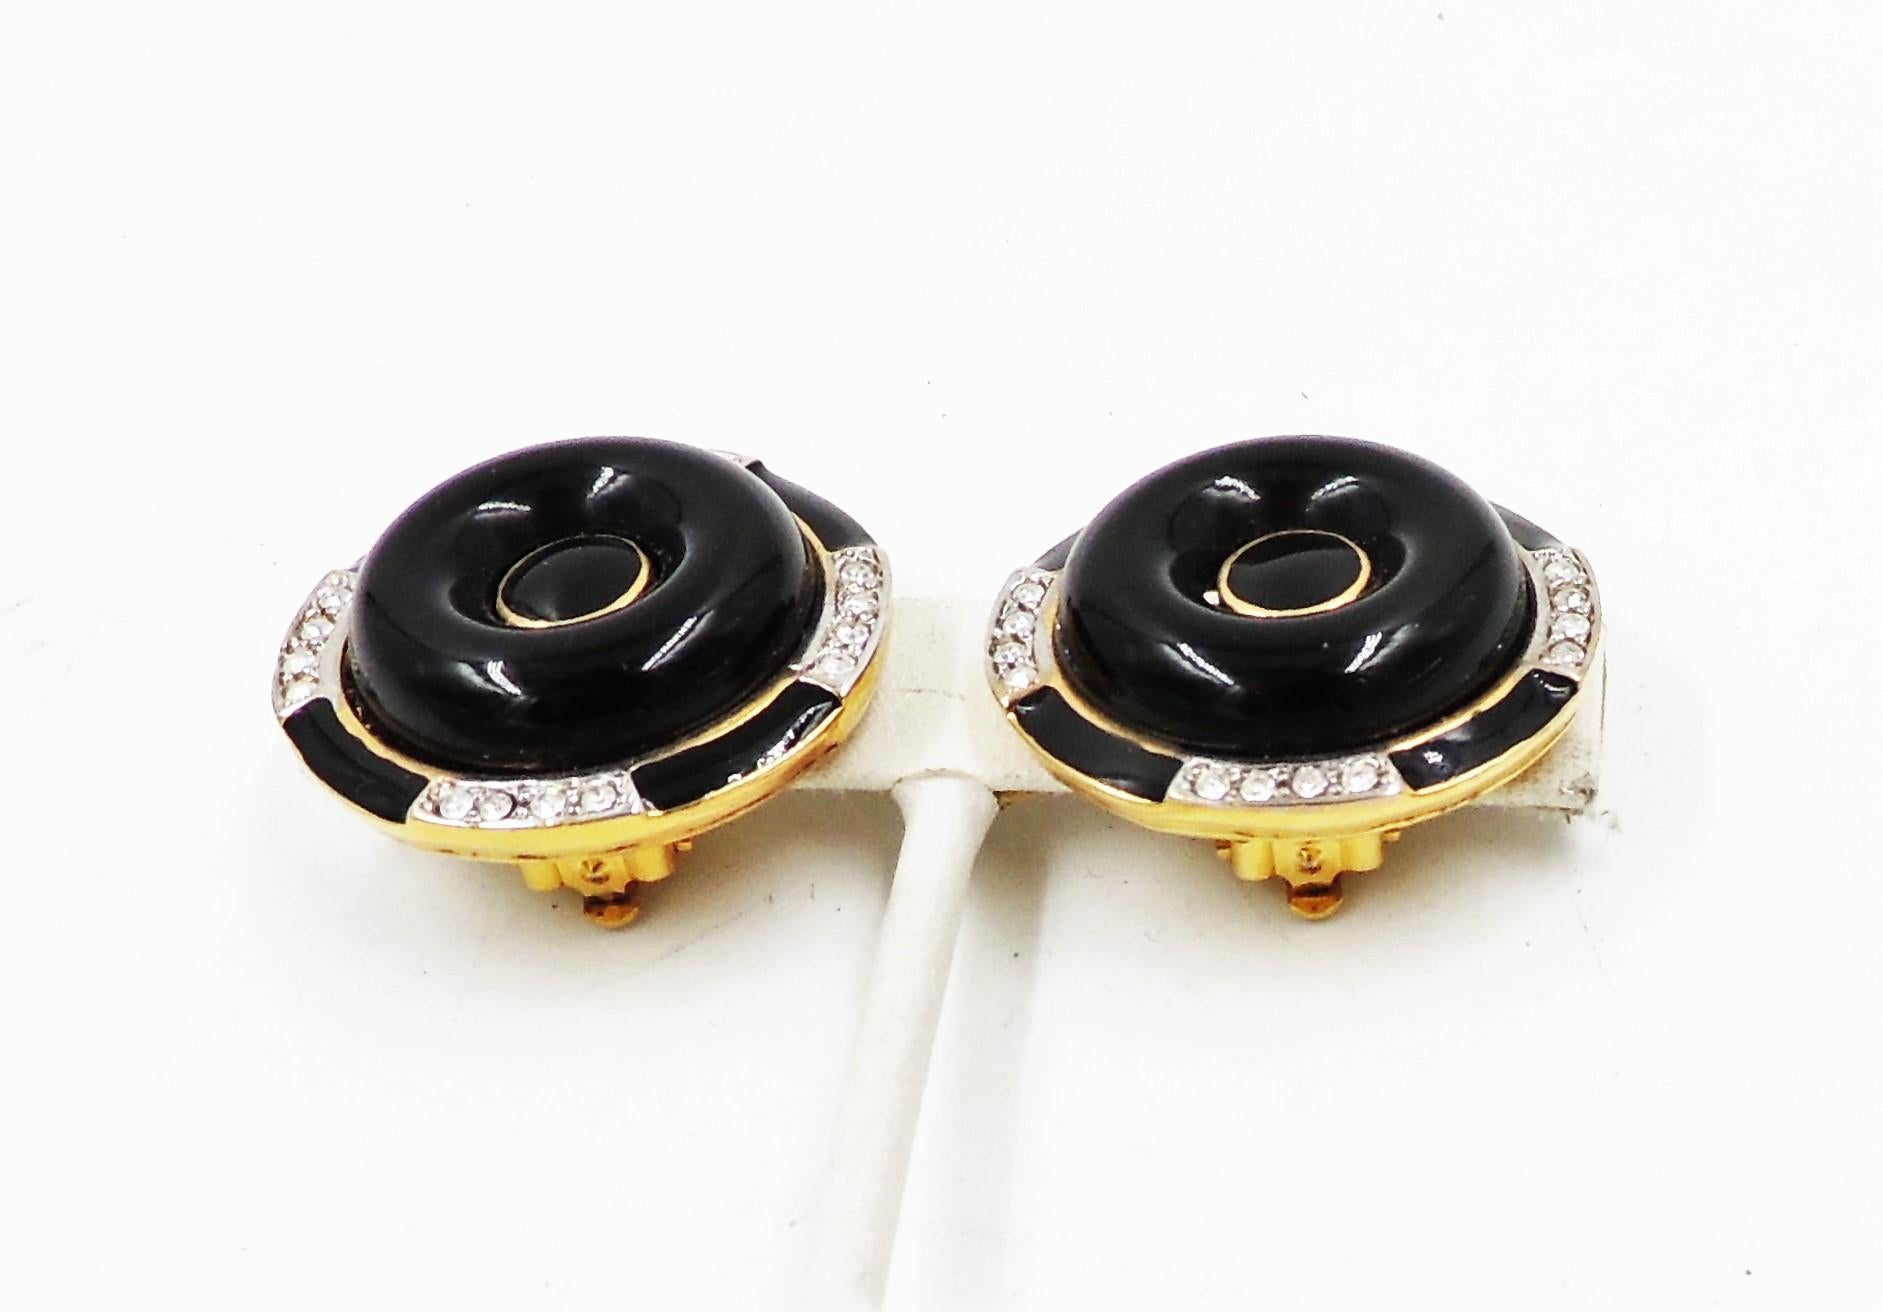 Vintage 1980s Signed Kenneth Lane Deco Style Faux-Onyx Cabochon Earrings In Excellent Condition For Sale In Easton, PA